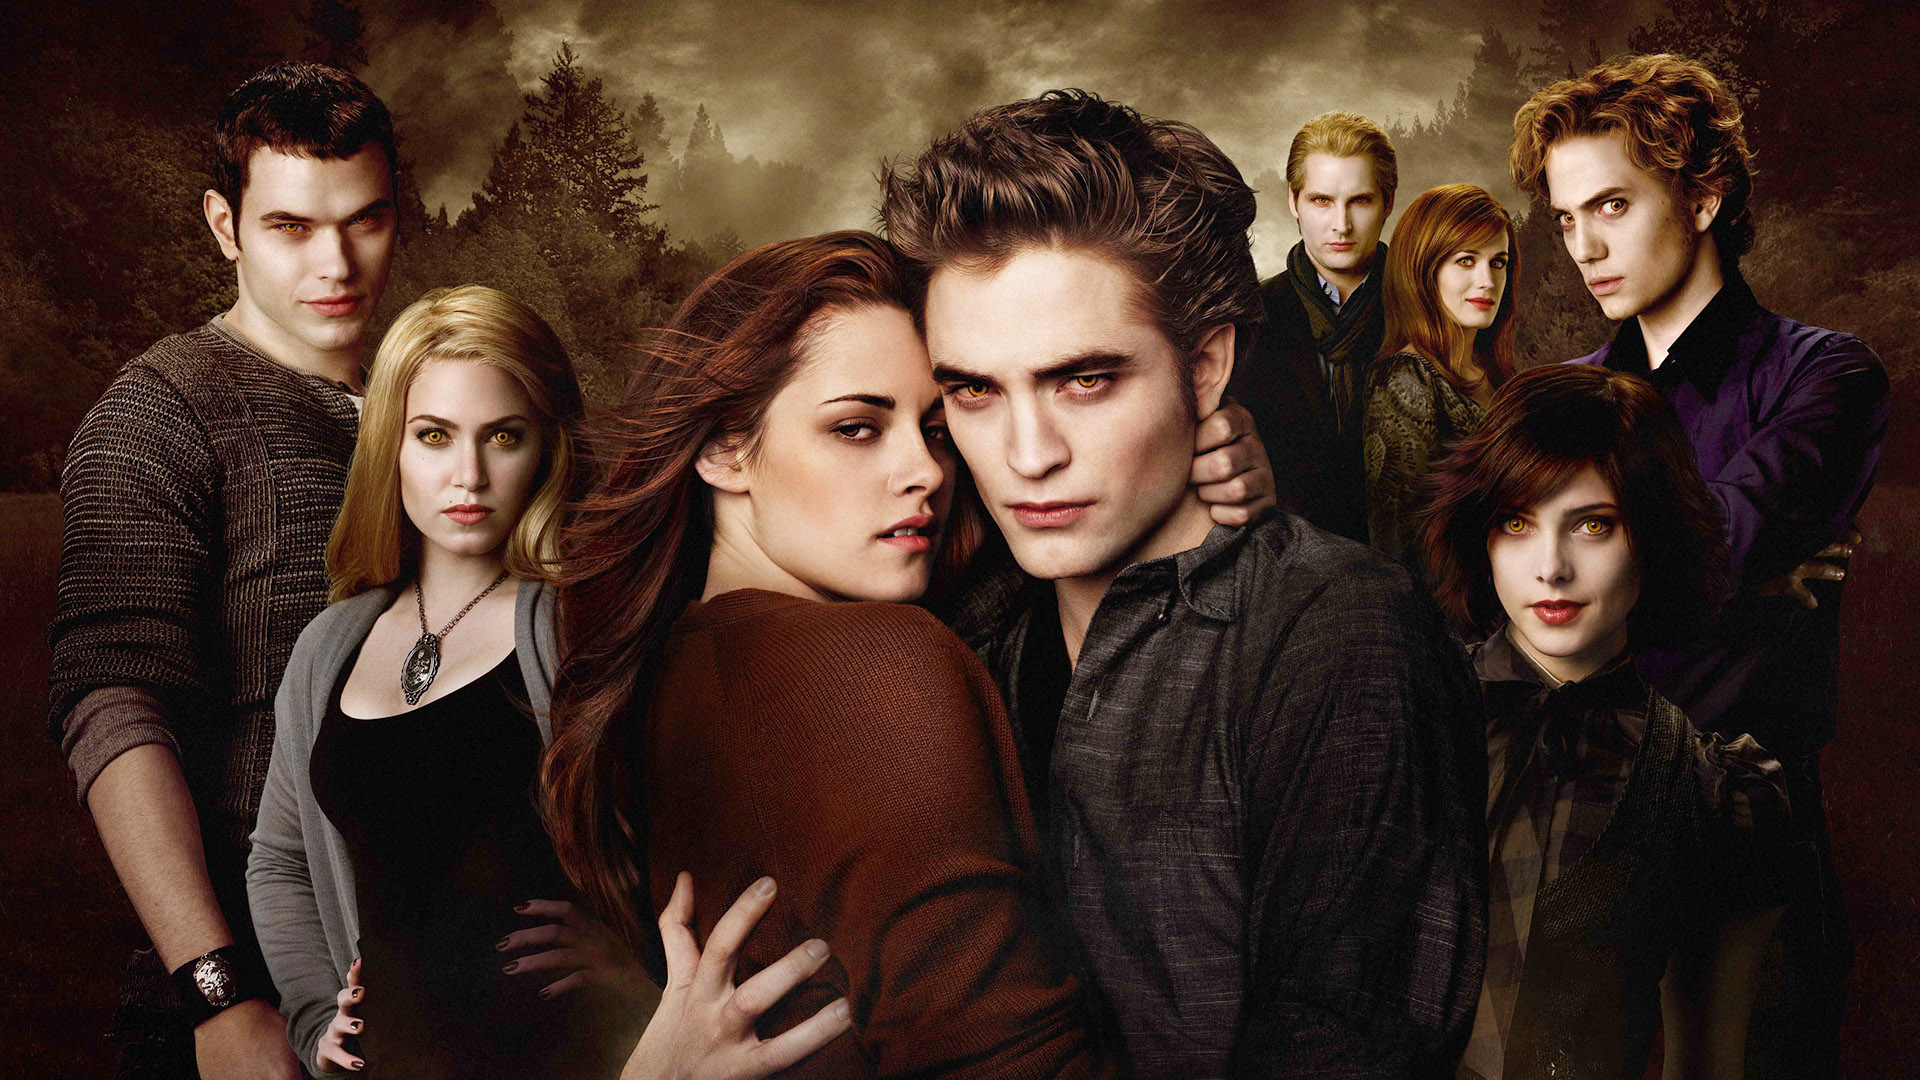 Can Twilight's TV Reboot Survive Without Its Toxic Love? 10 Potential Disasters